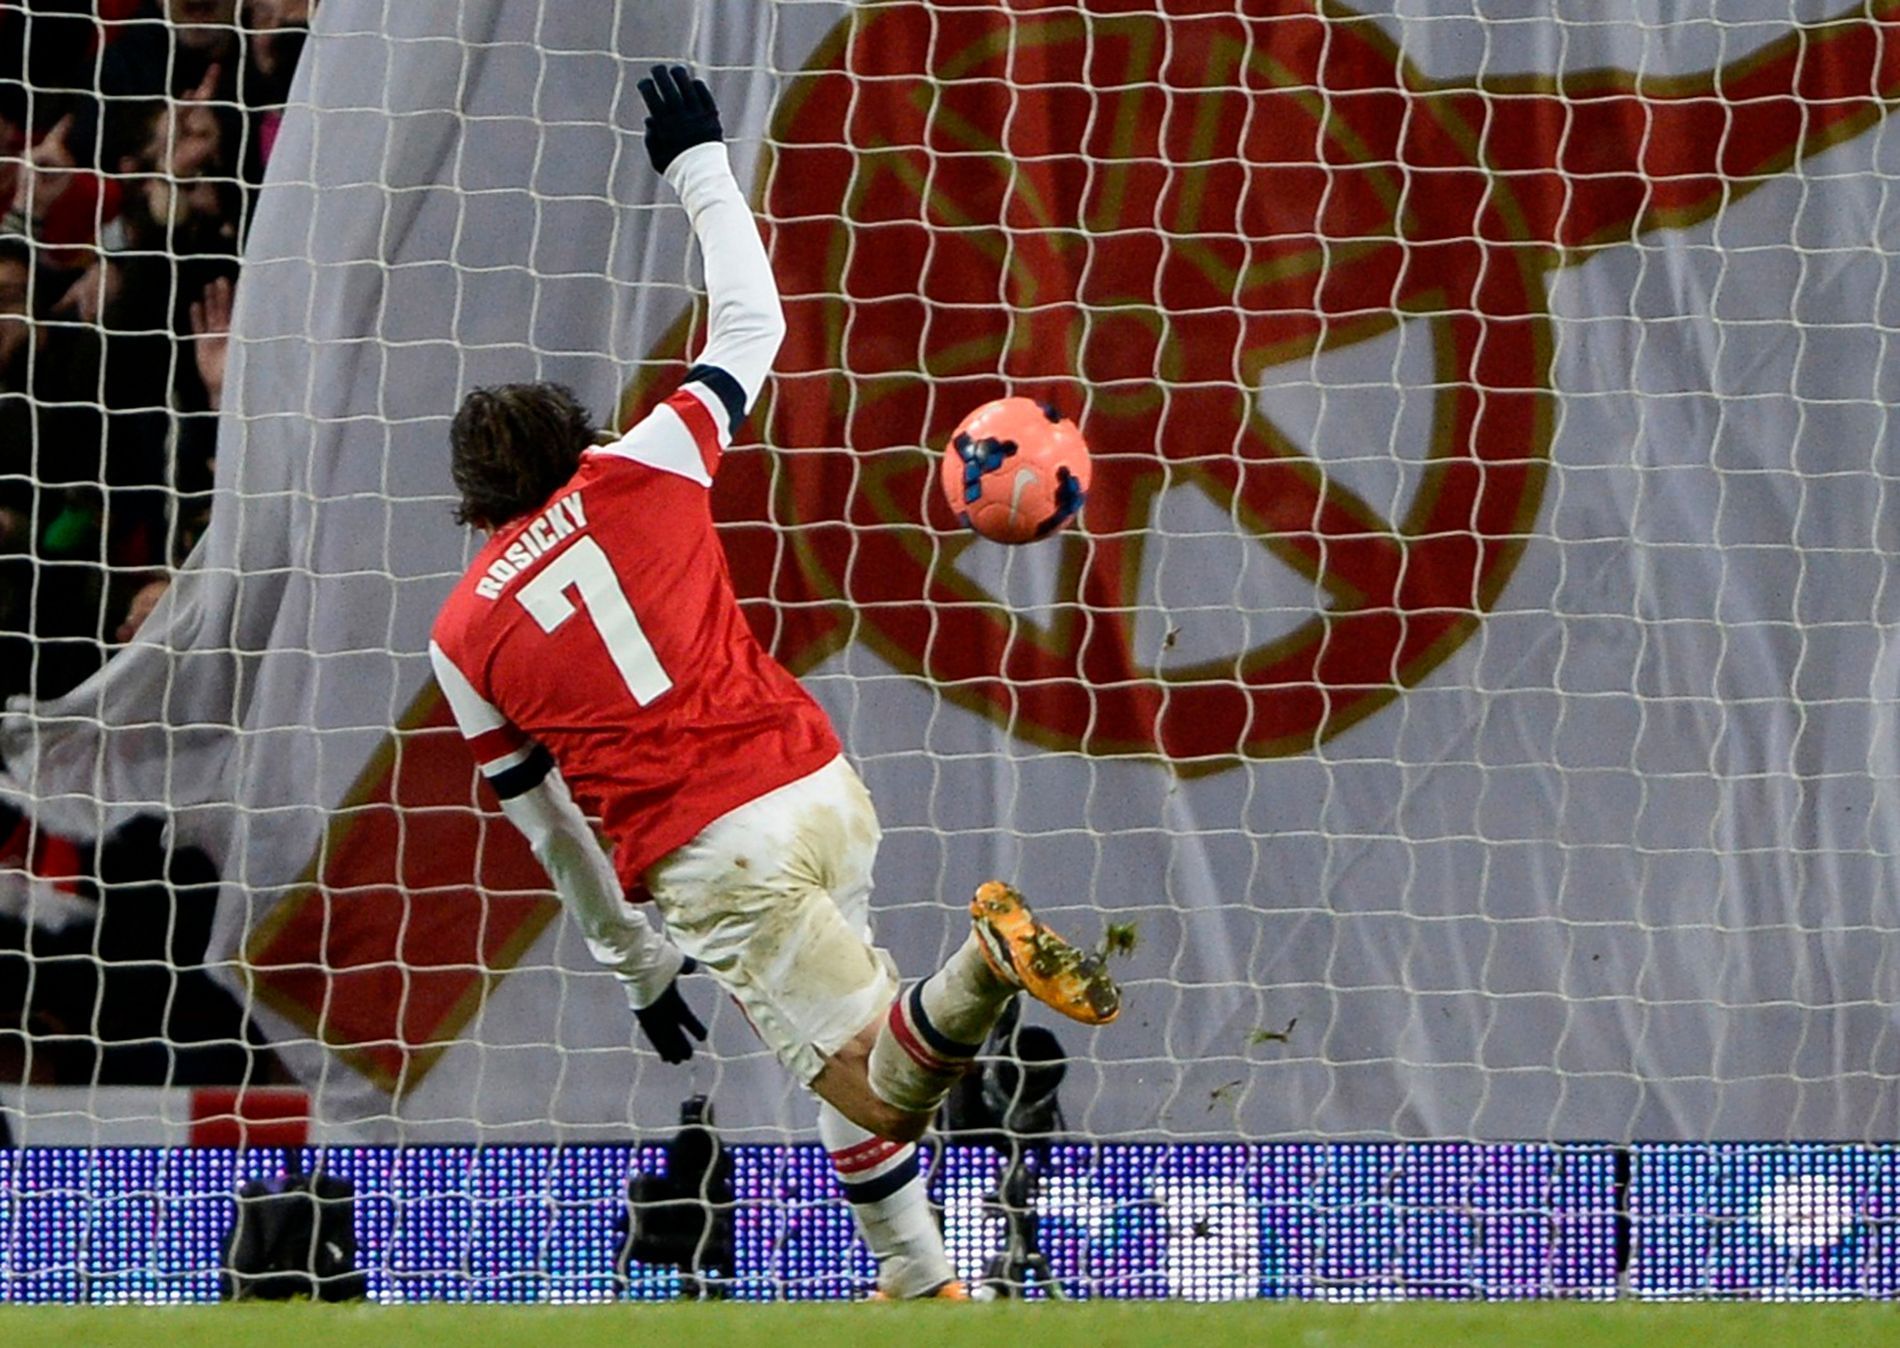 Arsenal's Rosicky scores a goal against Tottenham Hotspur during their English FA Cup soccer match at the Emirates stadium in London